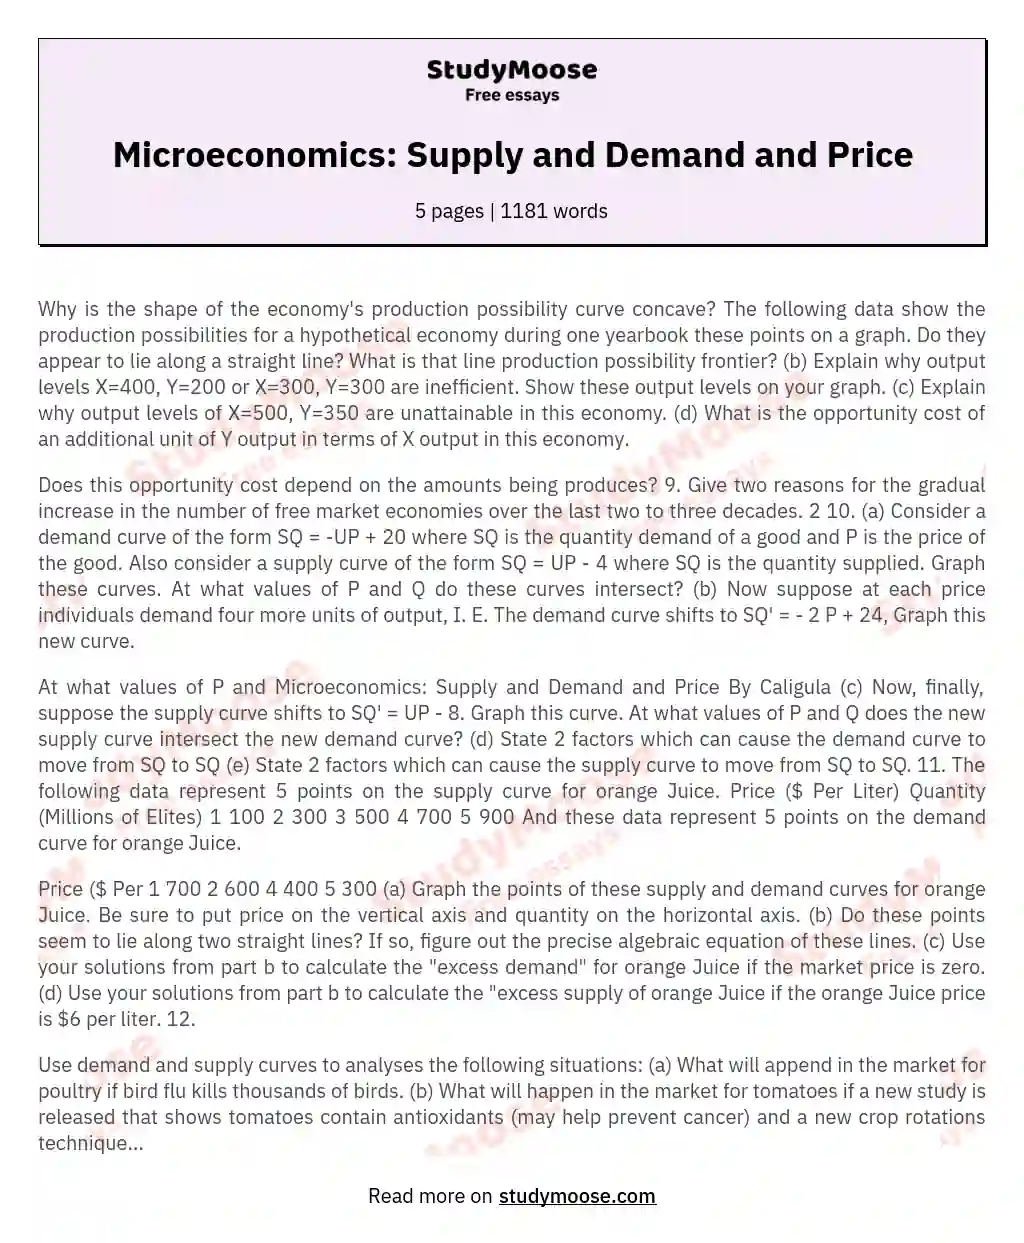 Microeconomics: Supply and Demand and Price